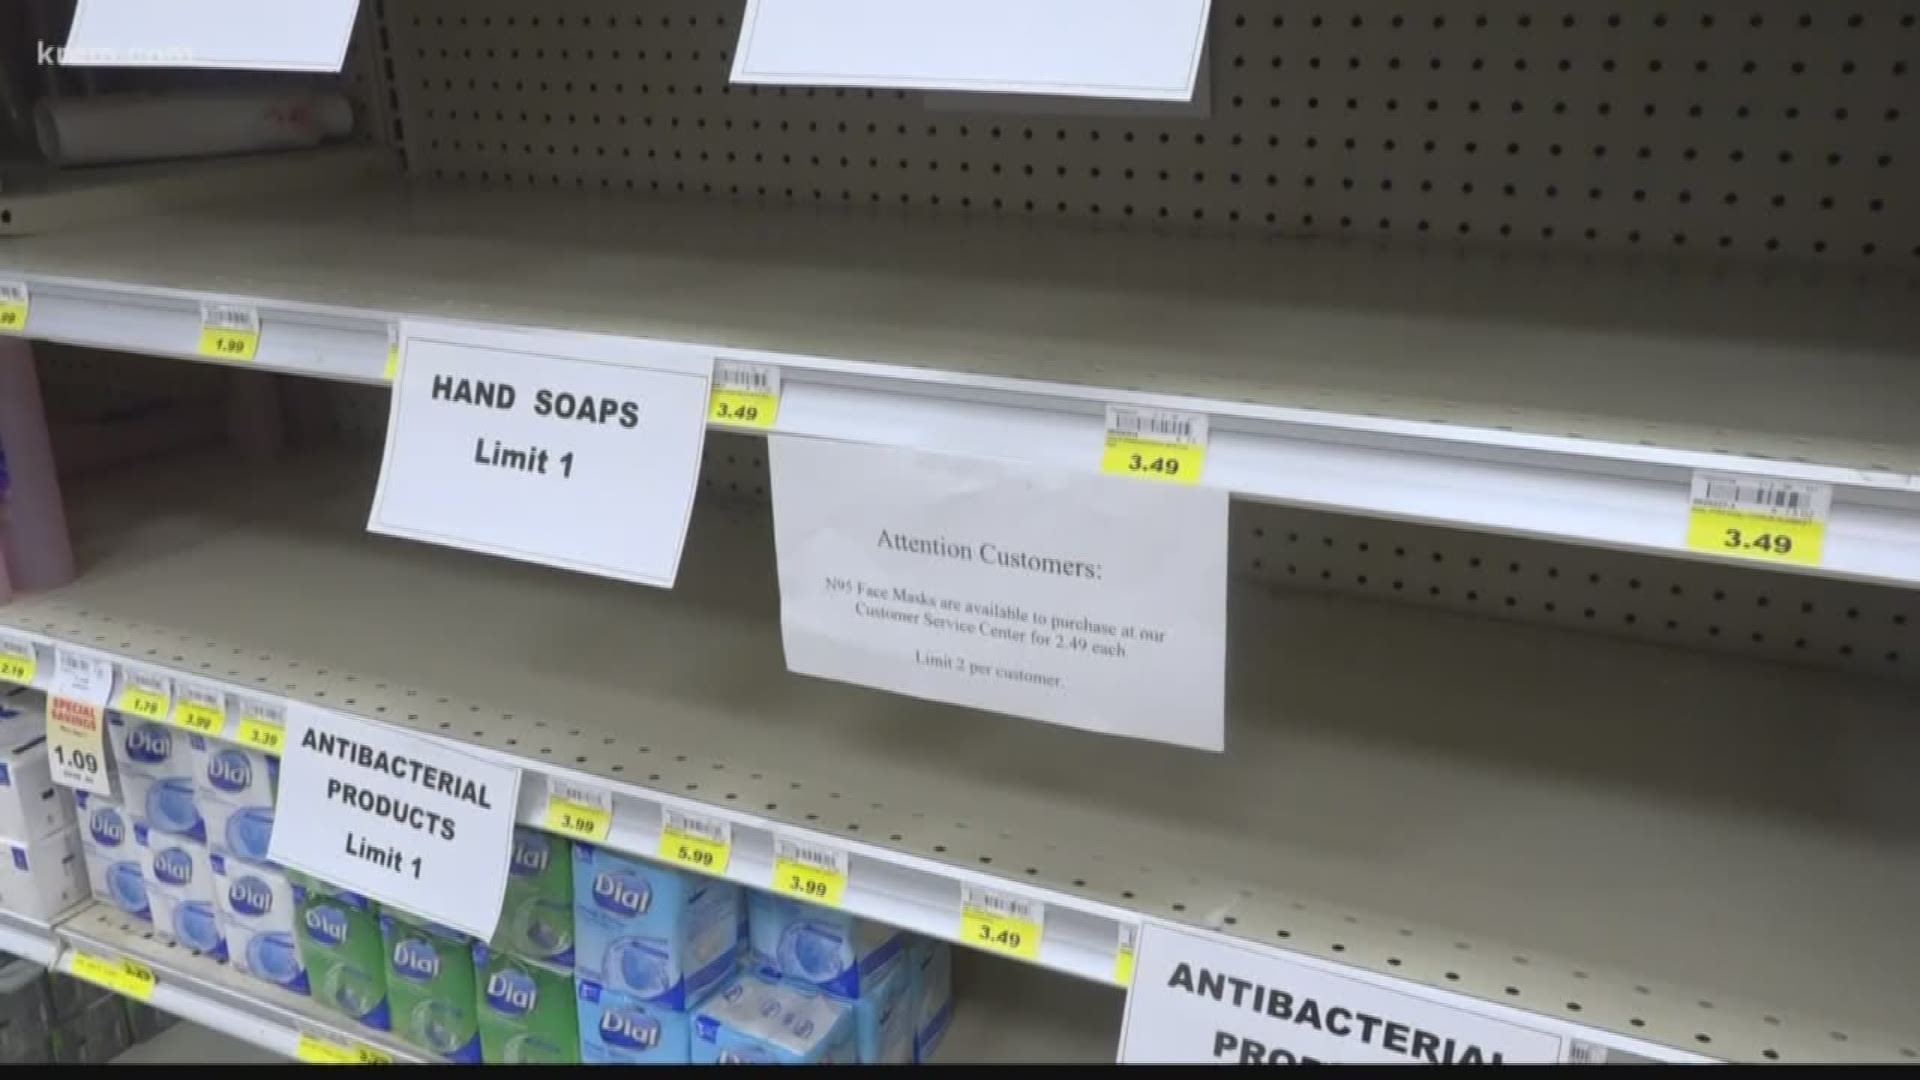 Supermarkets around Spokane are trying to catch up on depleted items like toilet paper, cleaning supplies and diapers.